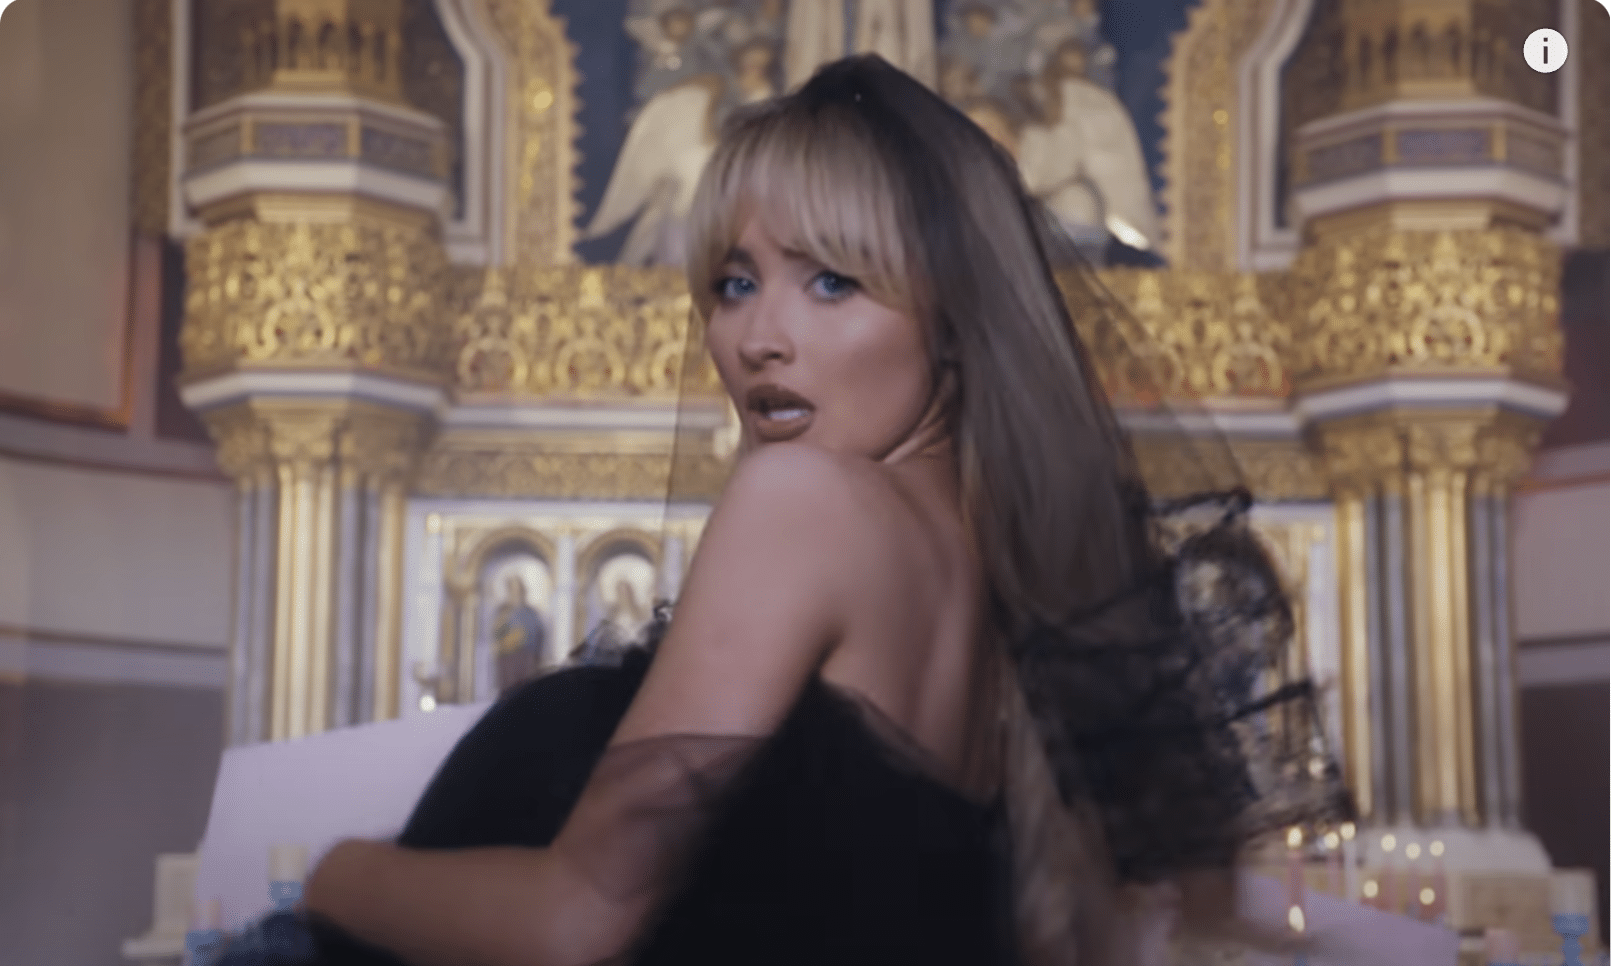 Pop star who filmed ‘inappropriate’ music video in Catholic Church defends her actions